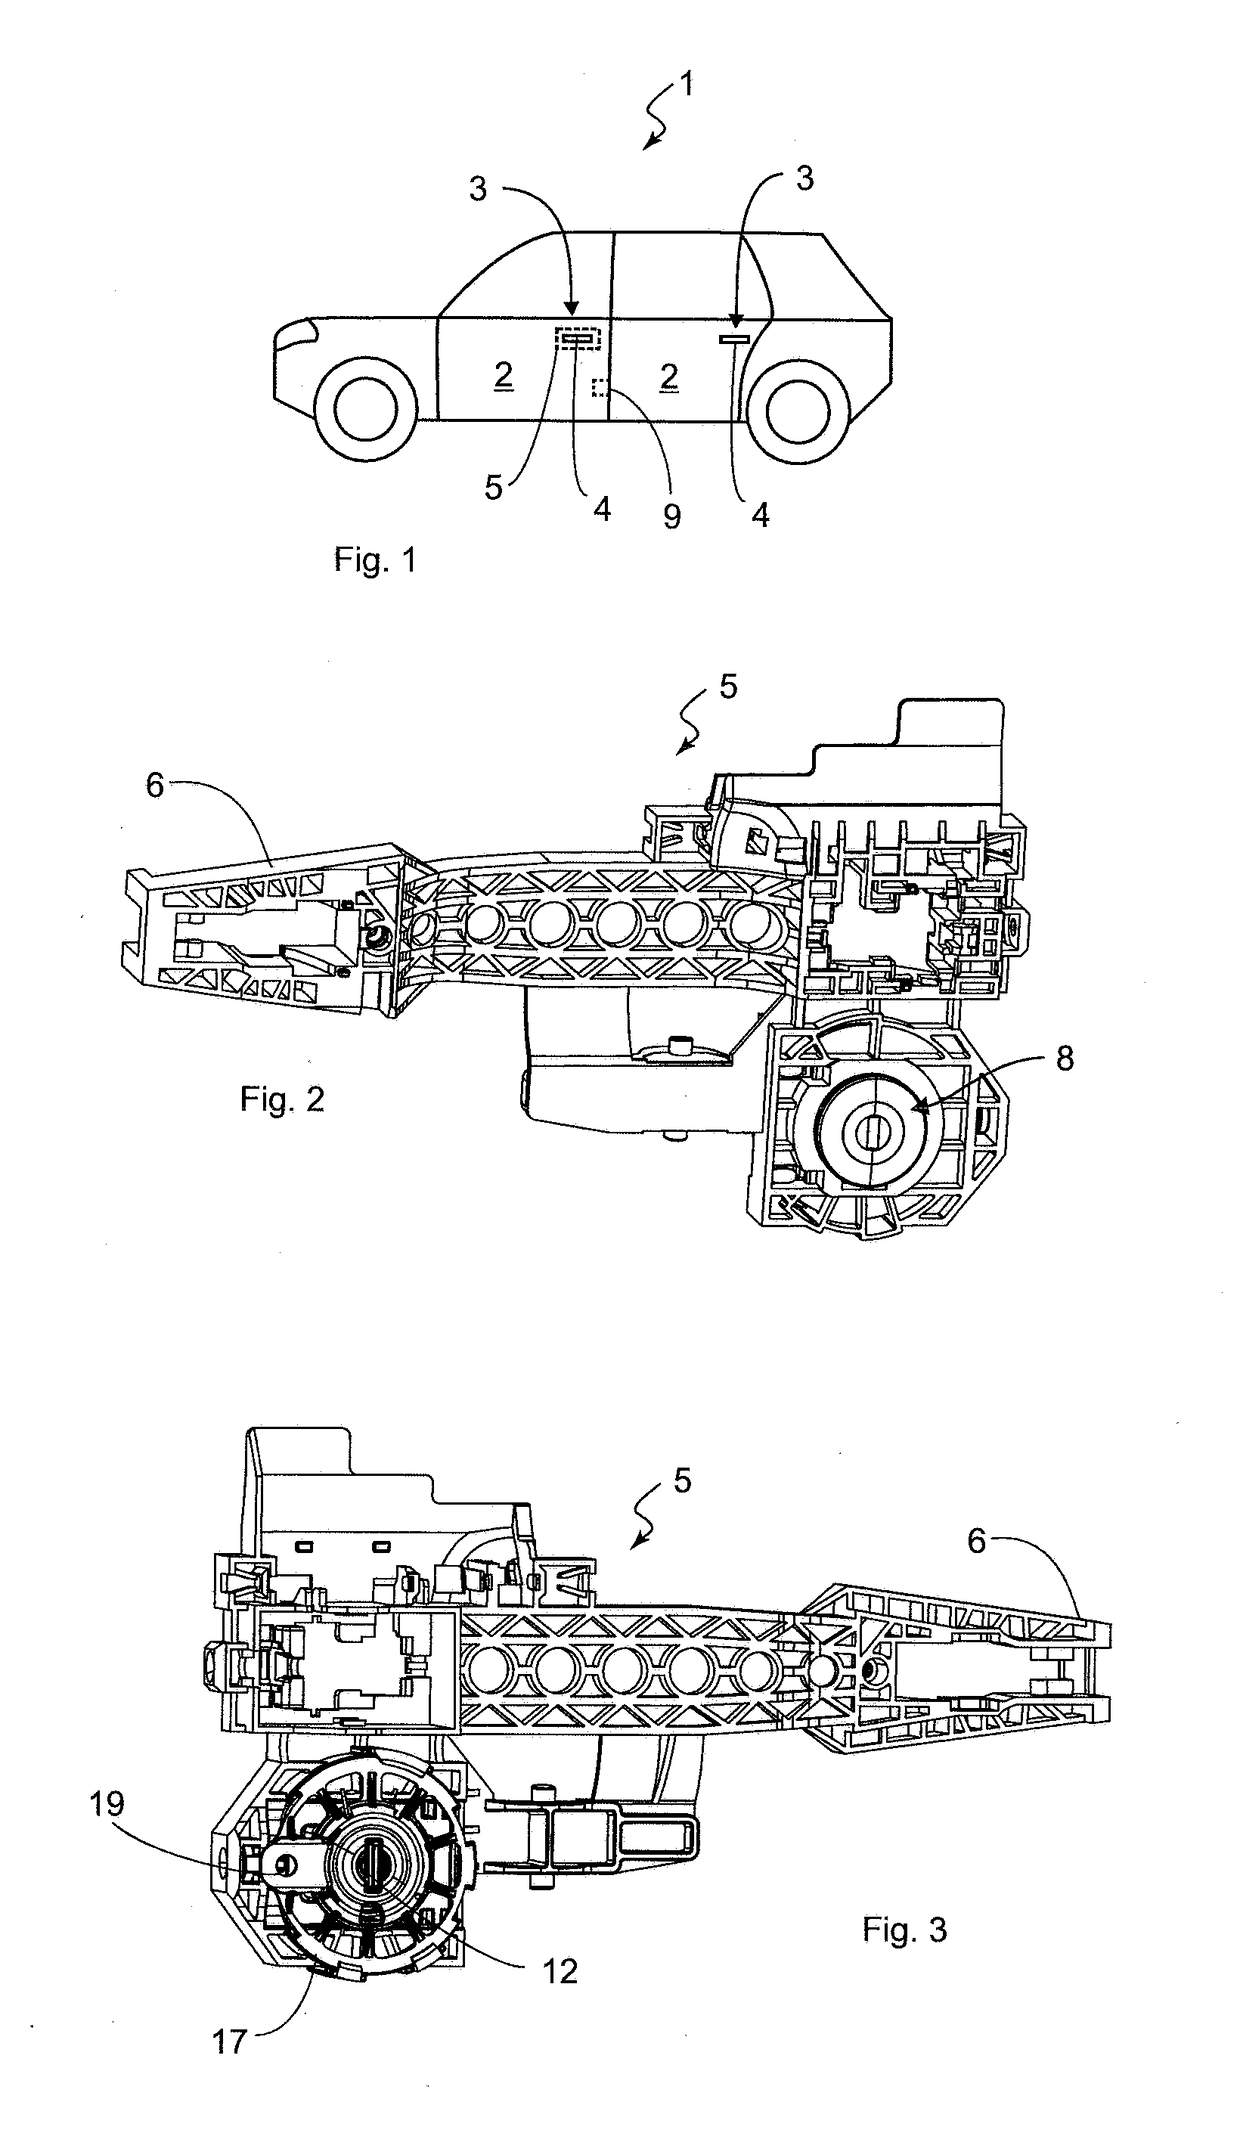 Door handle mounting device for a motor vehicle